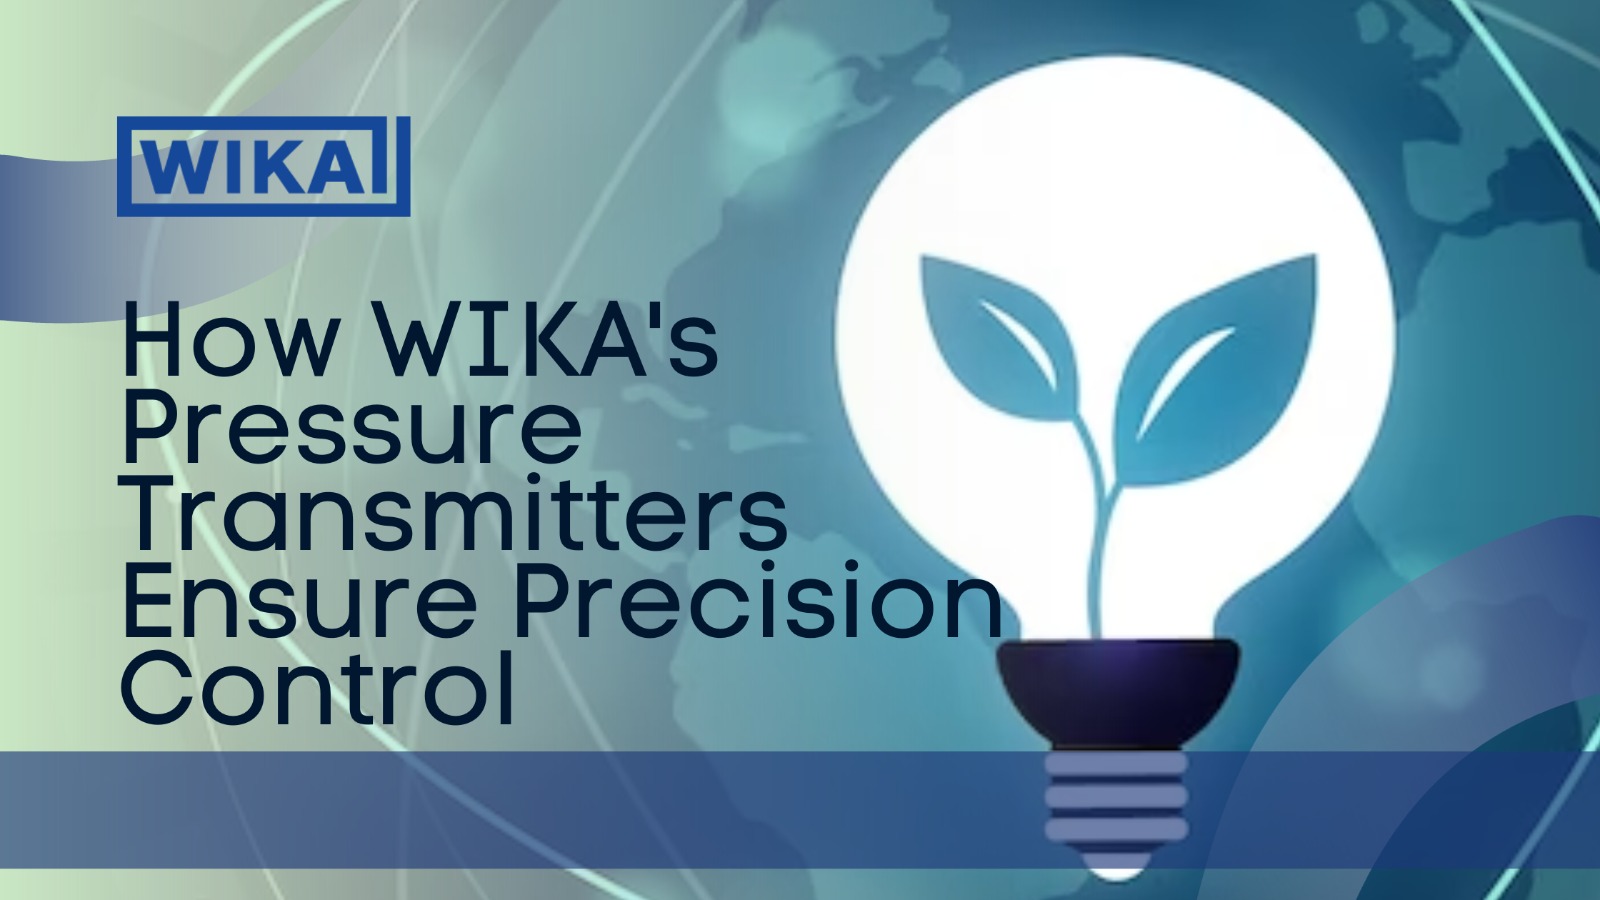 WIKA solutions